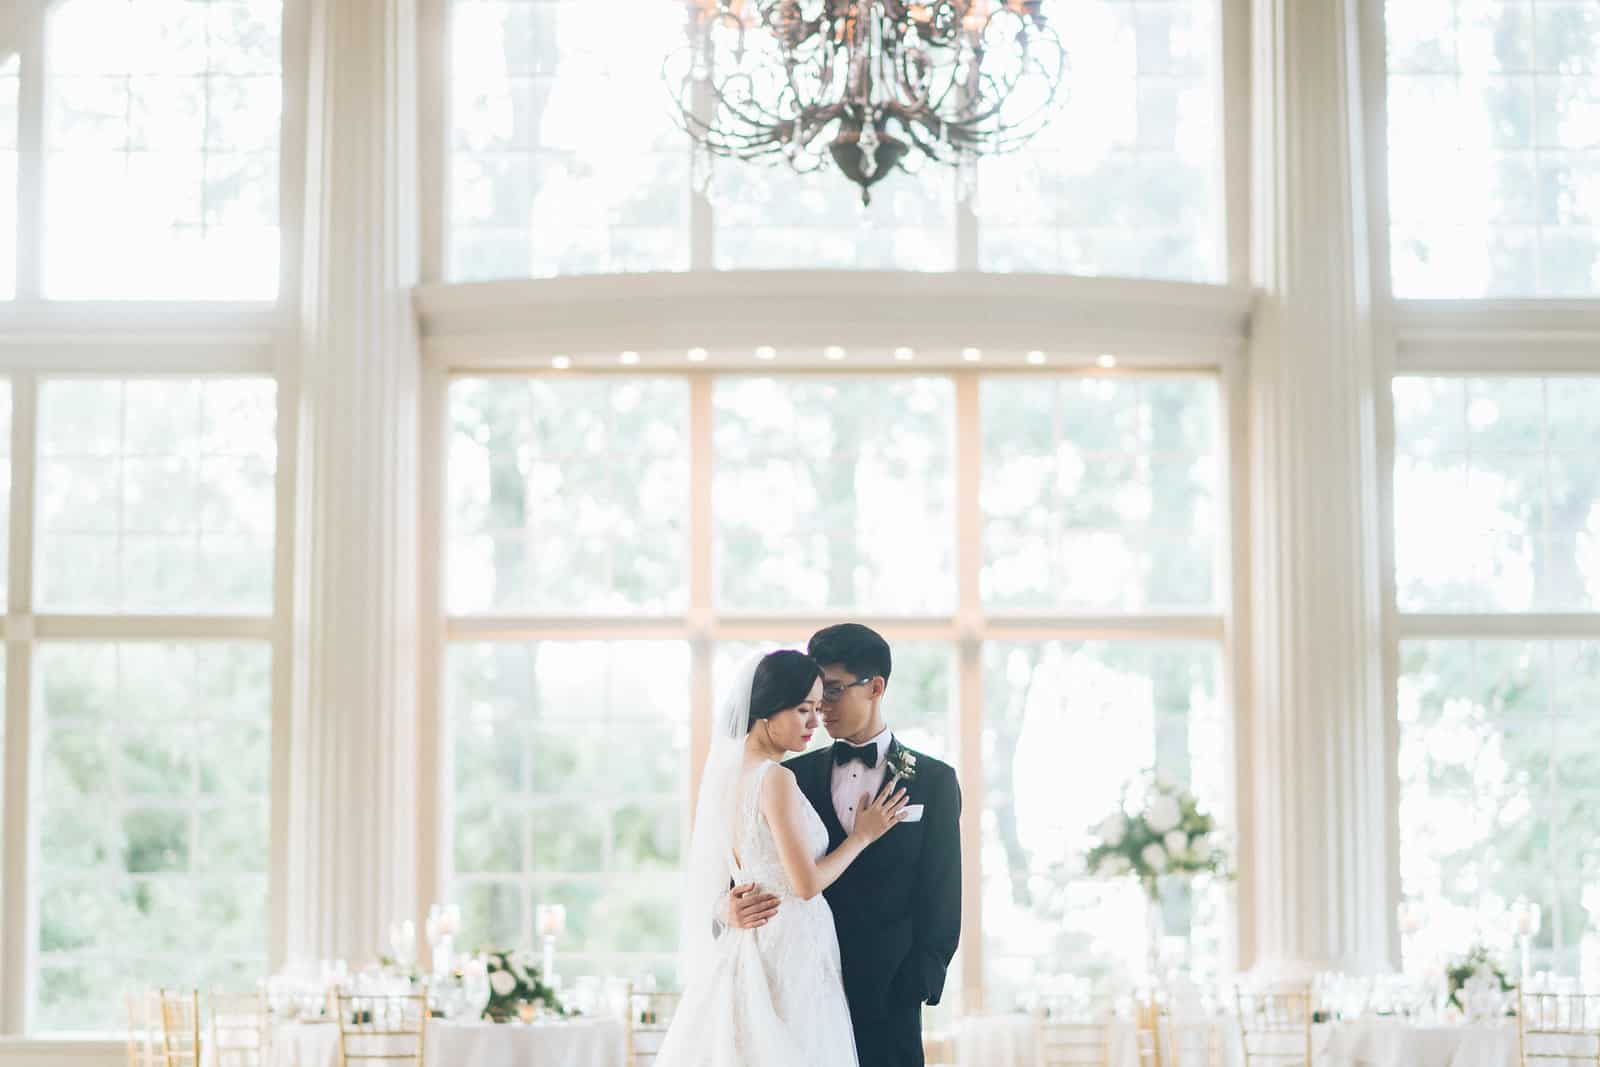 Understanding the Different Kinds of Wedding Photography - Light & Airy Examples of NJ Wedding Photographer Ben Lau.